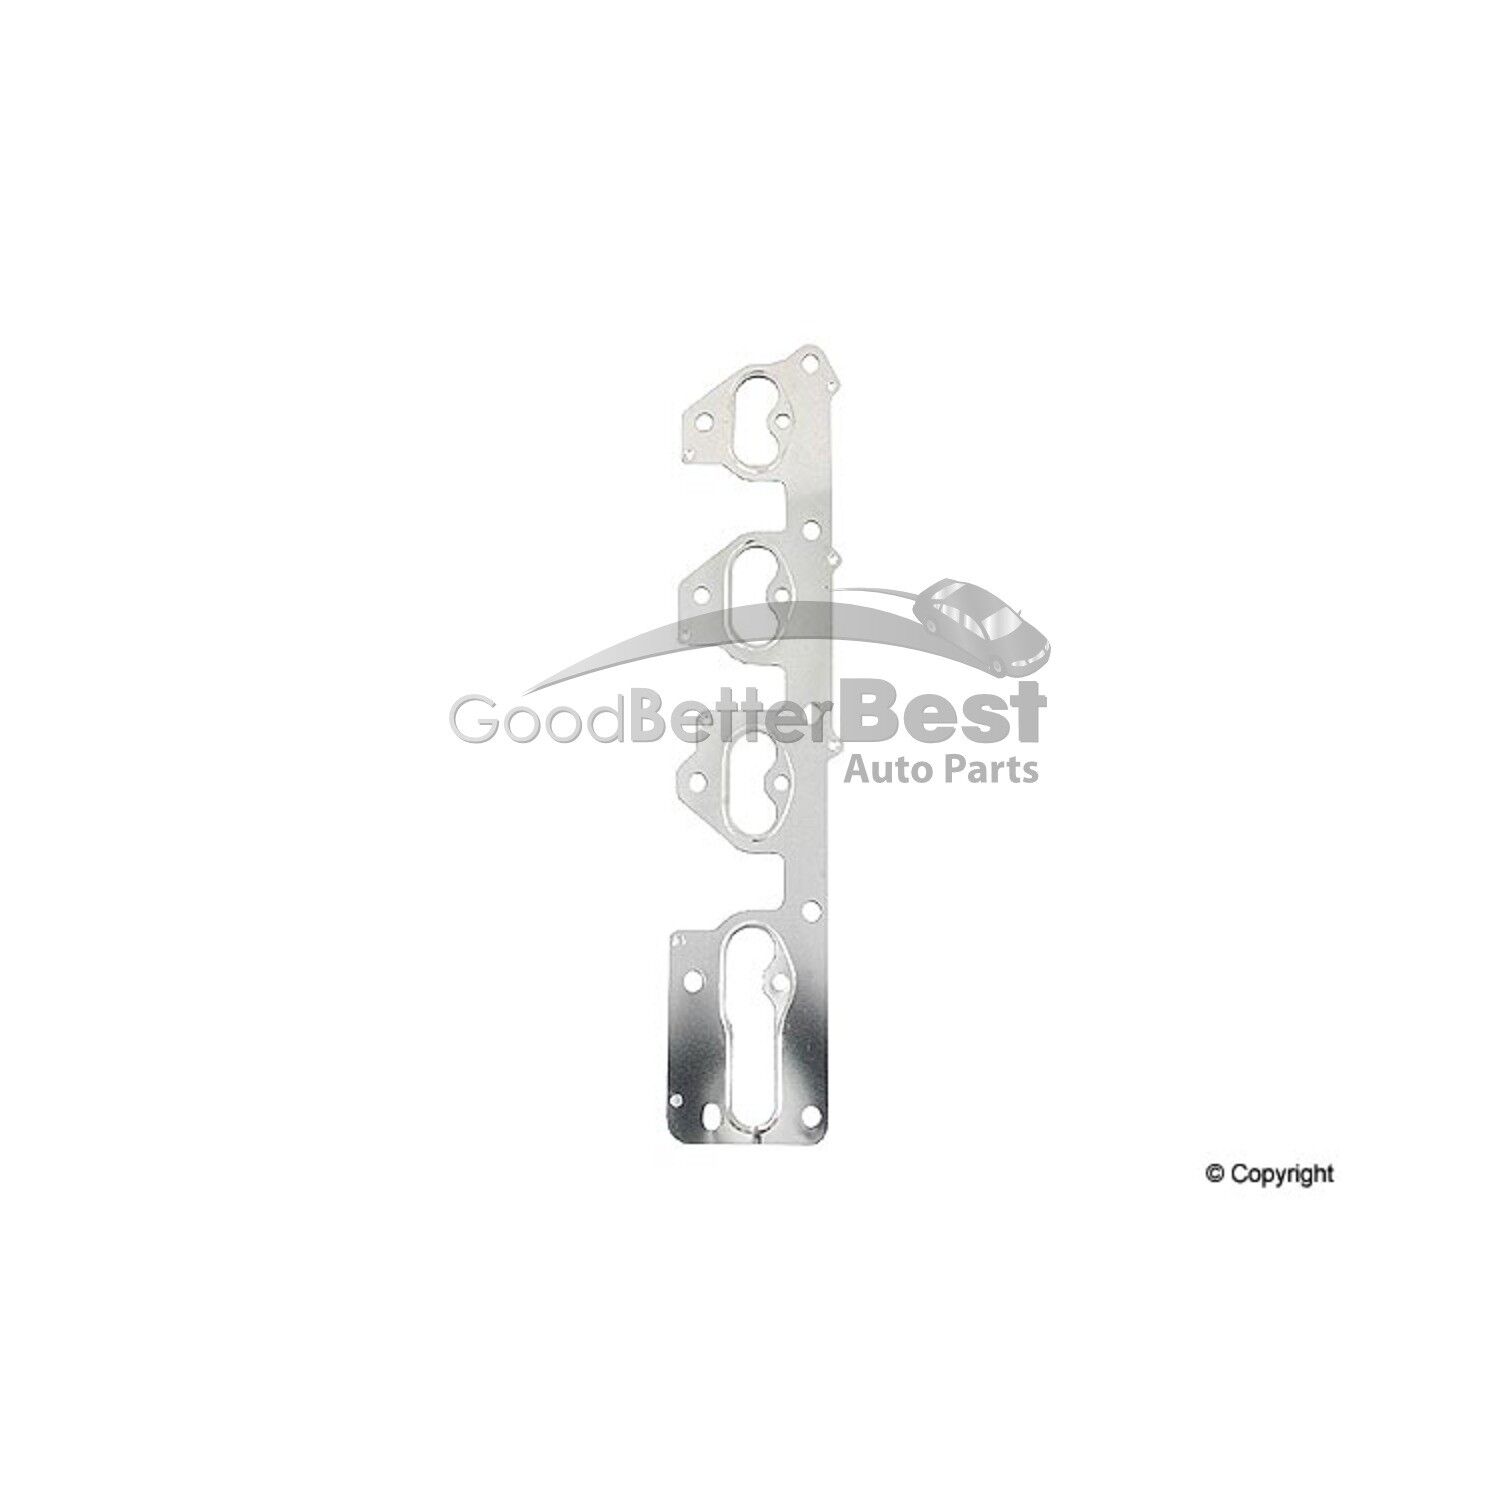 One New Parts-Mall Exhaust Manifold Gasket I92063157 for Daewoo